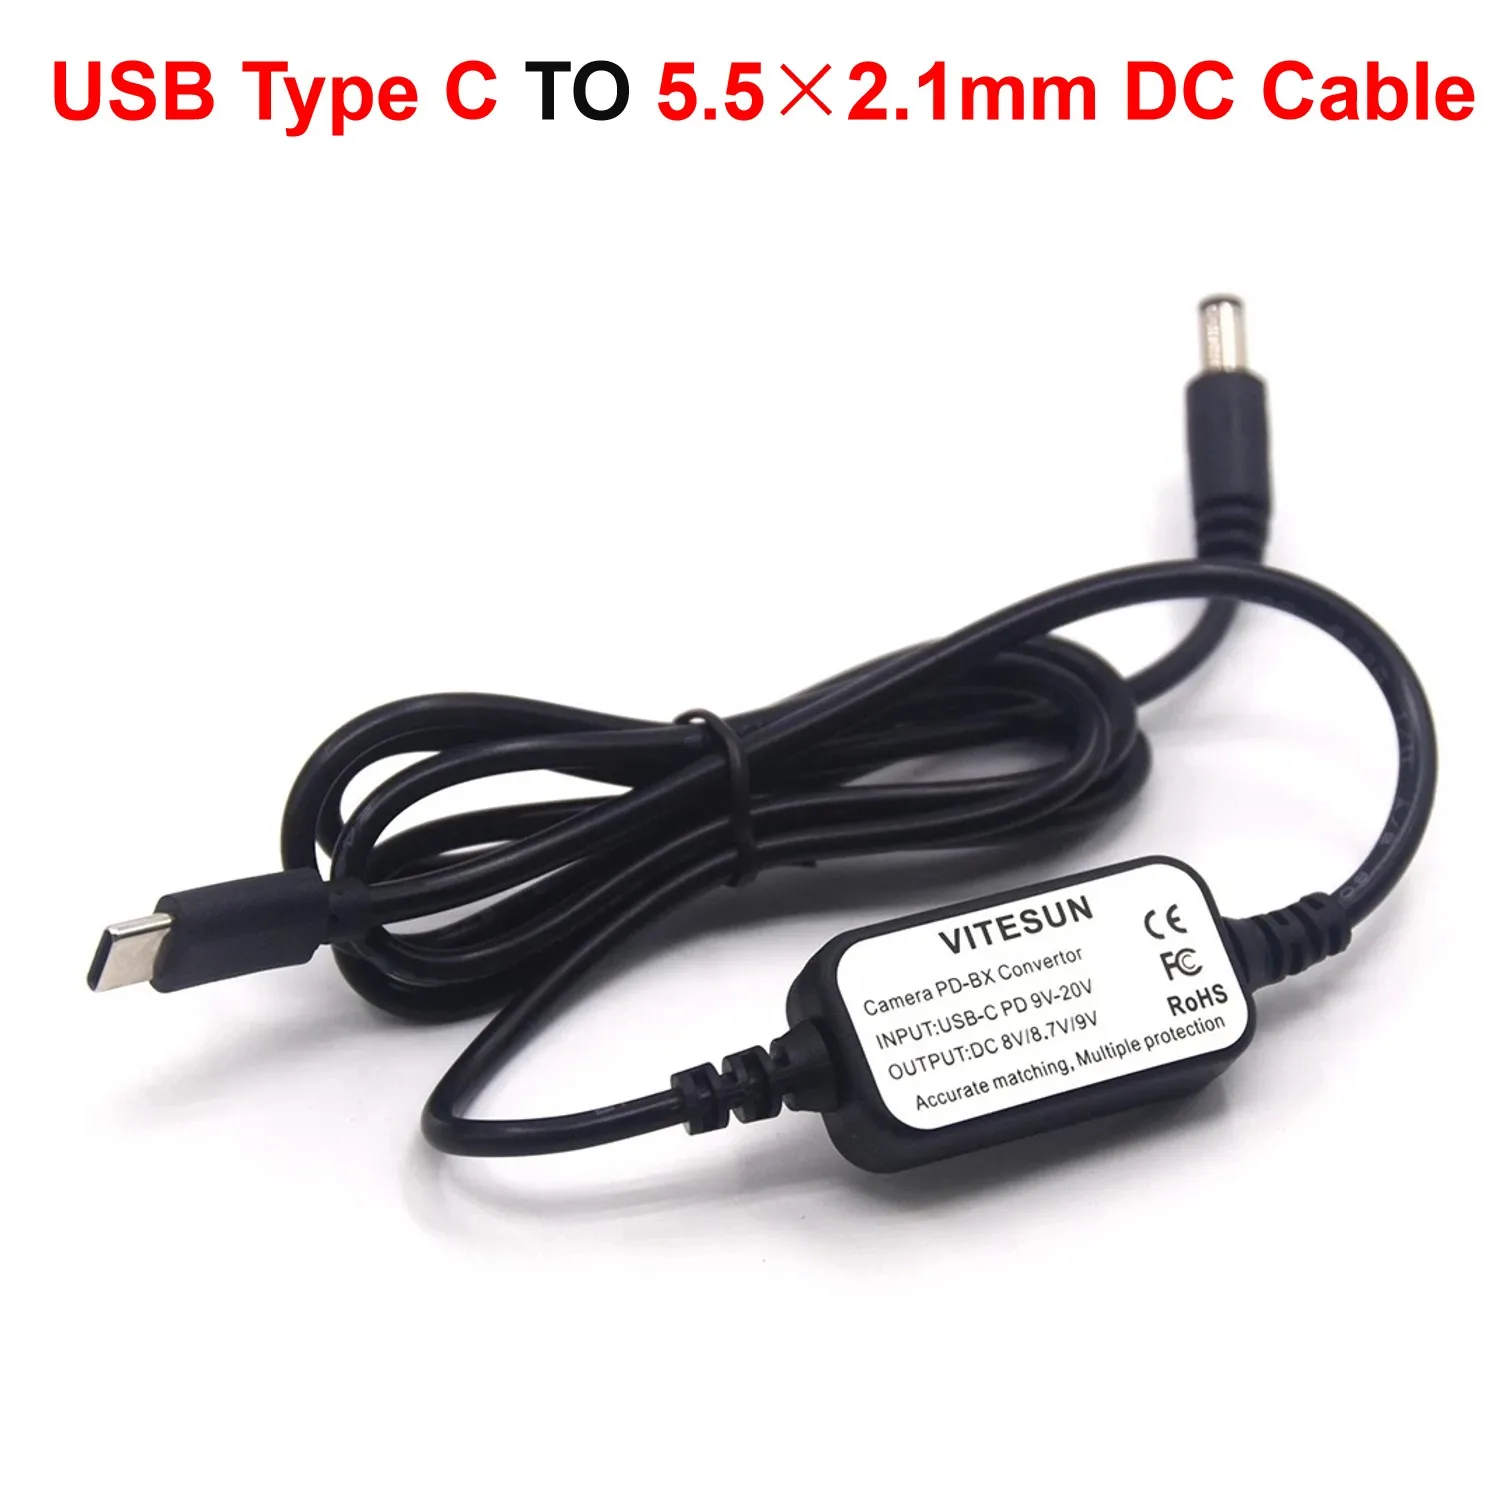 

USB Type C USB-PD Converter To DC Cable For ACK-E6 AC-PW20 NP-FW50 DMW-DCC3 BLB13 DR-E6 LP-E6 DR-400 BP-511 DR-E18 Dummy Battery